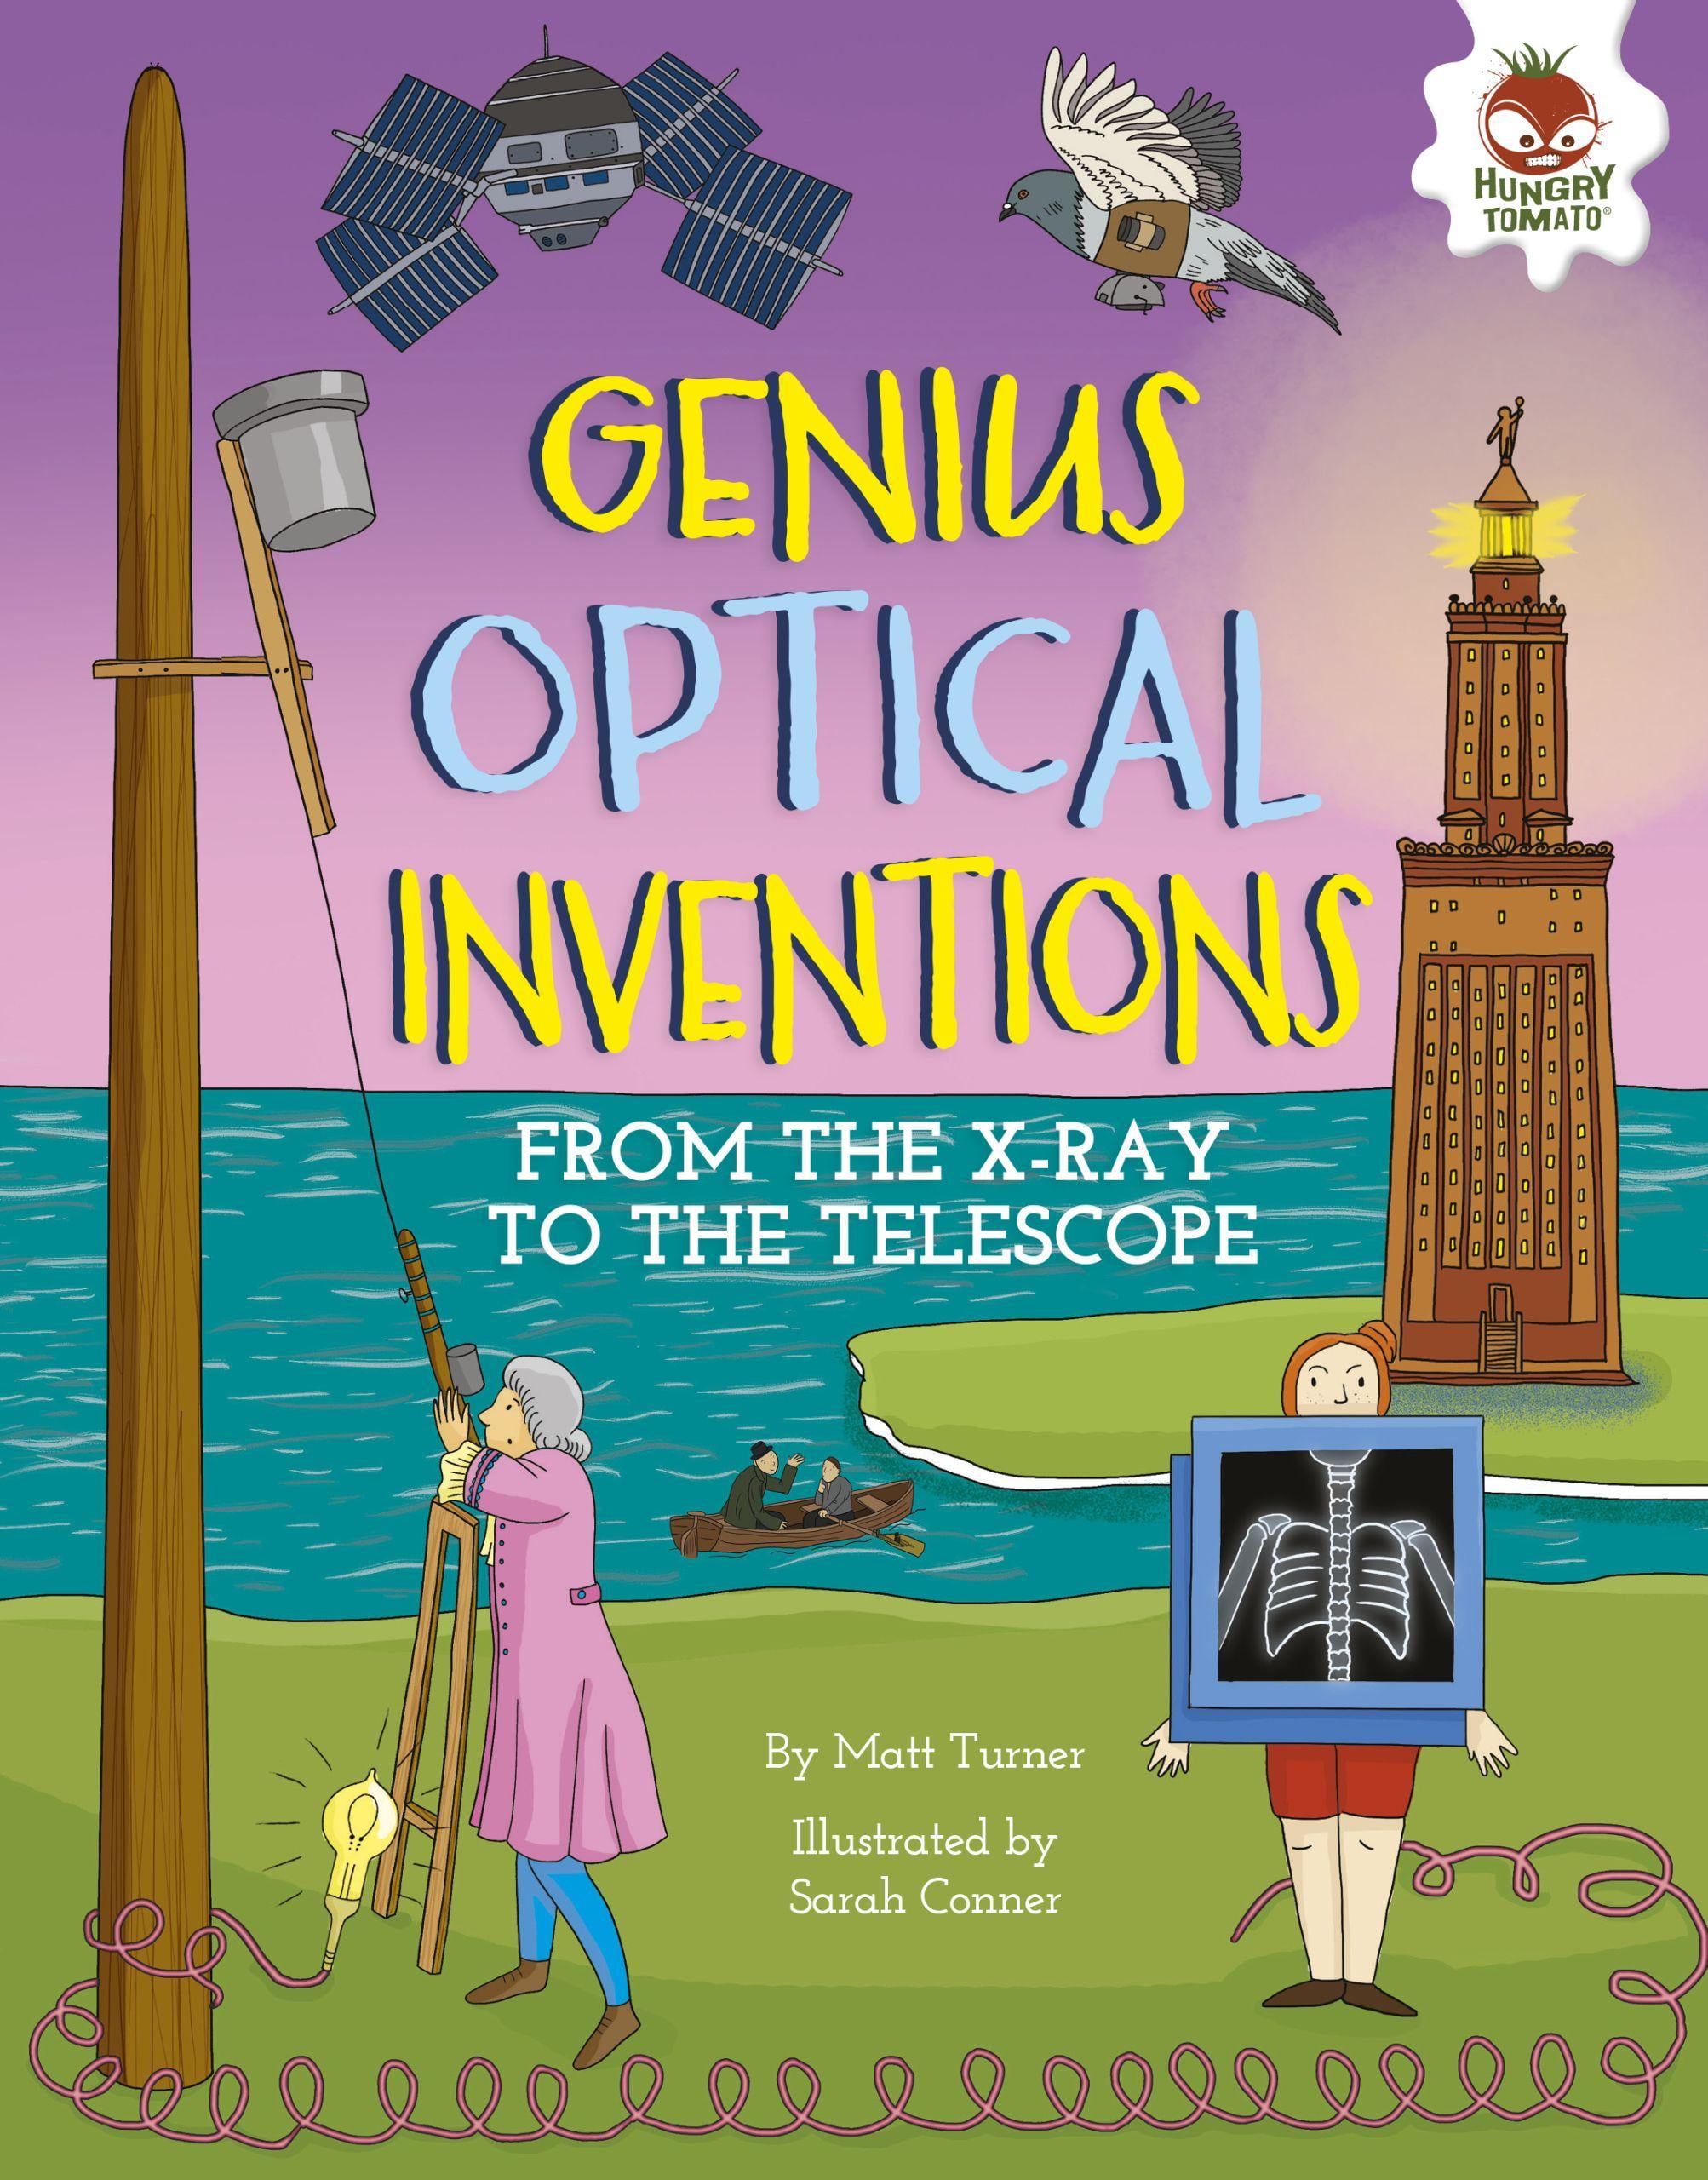 Incredible Inventions: Genius Optical Inventions (Hardcover) - Walmart